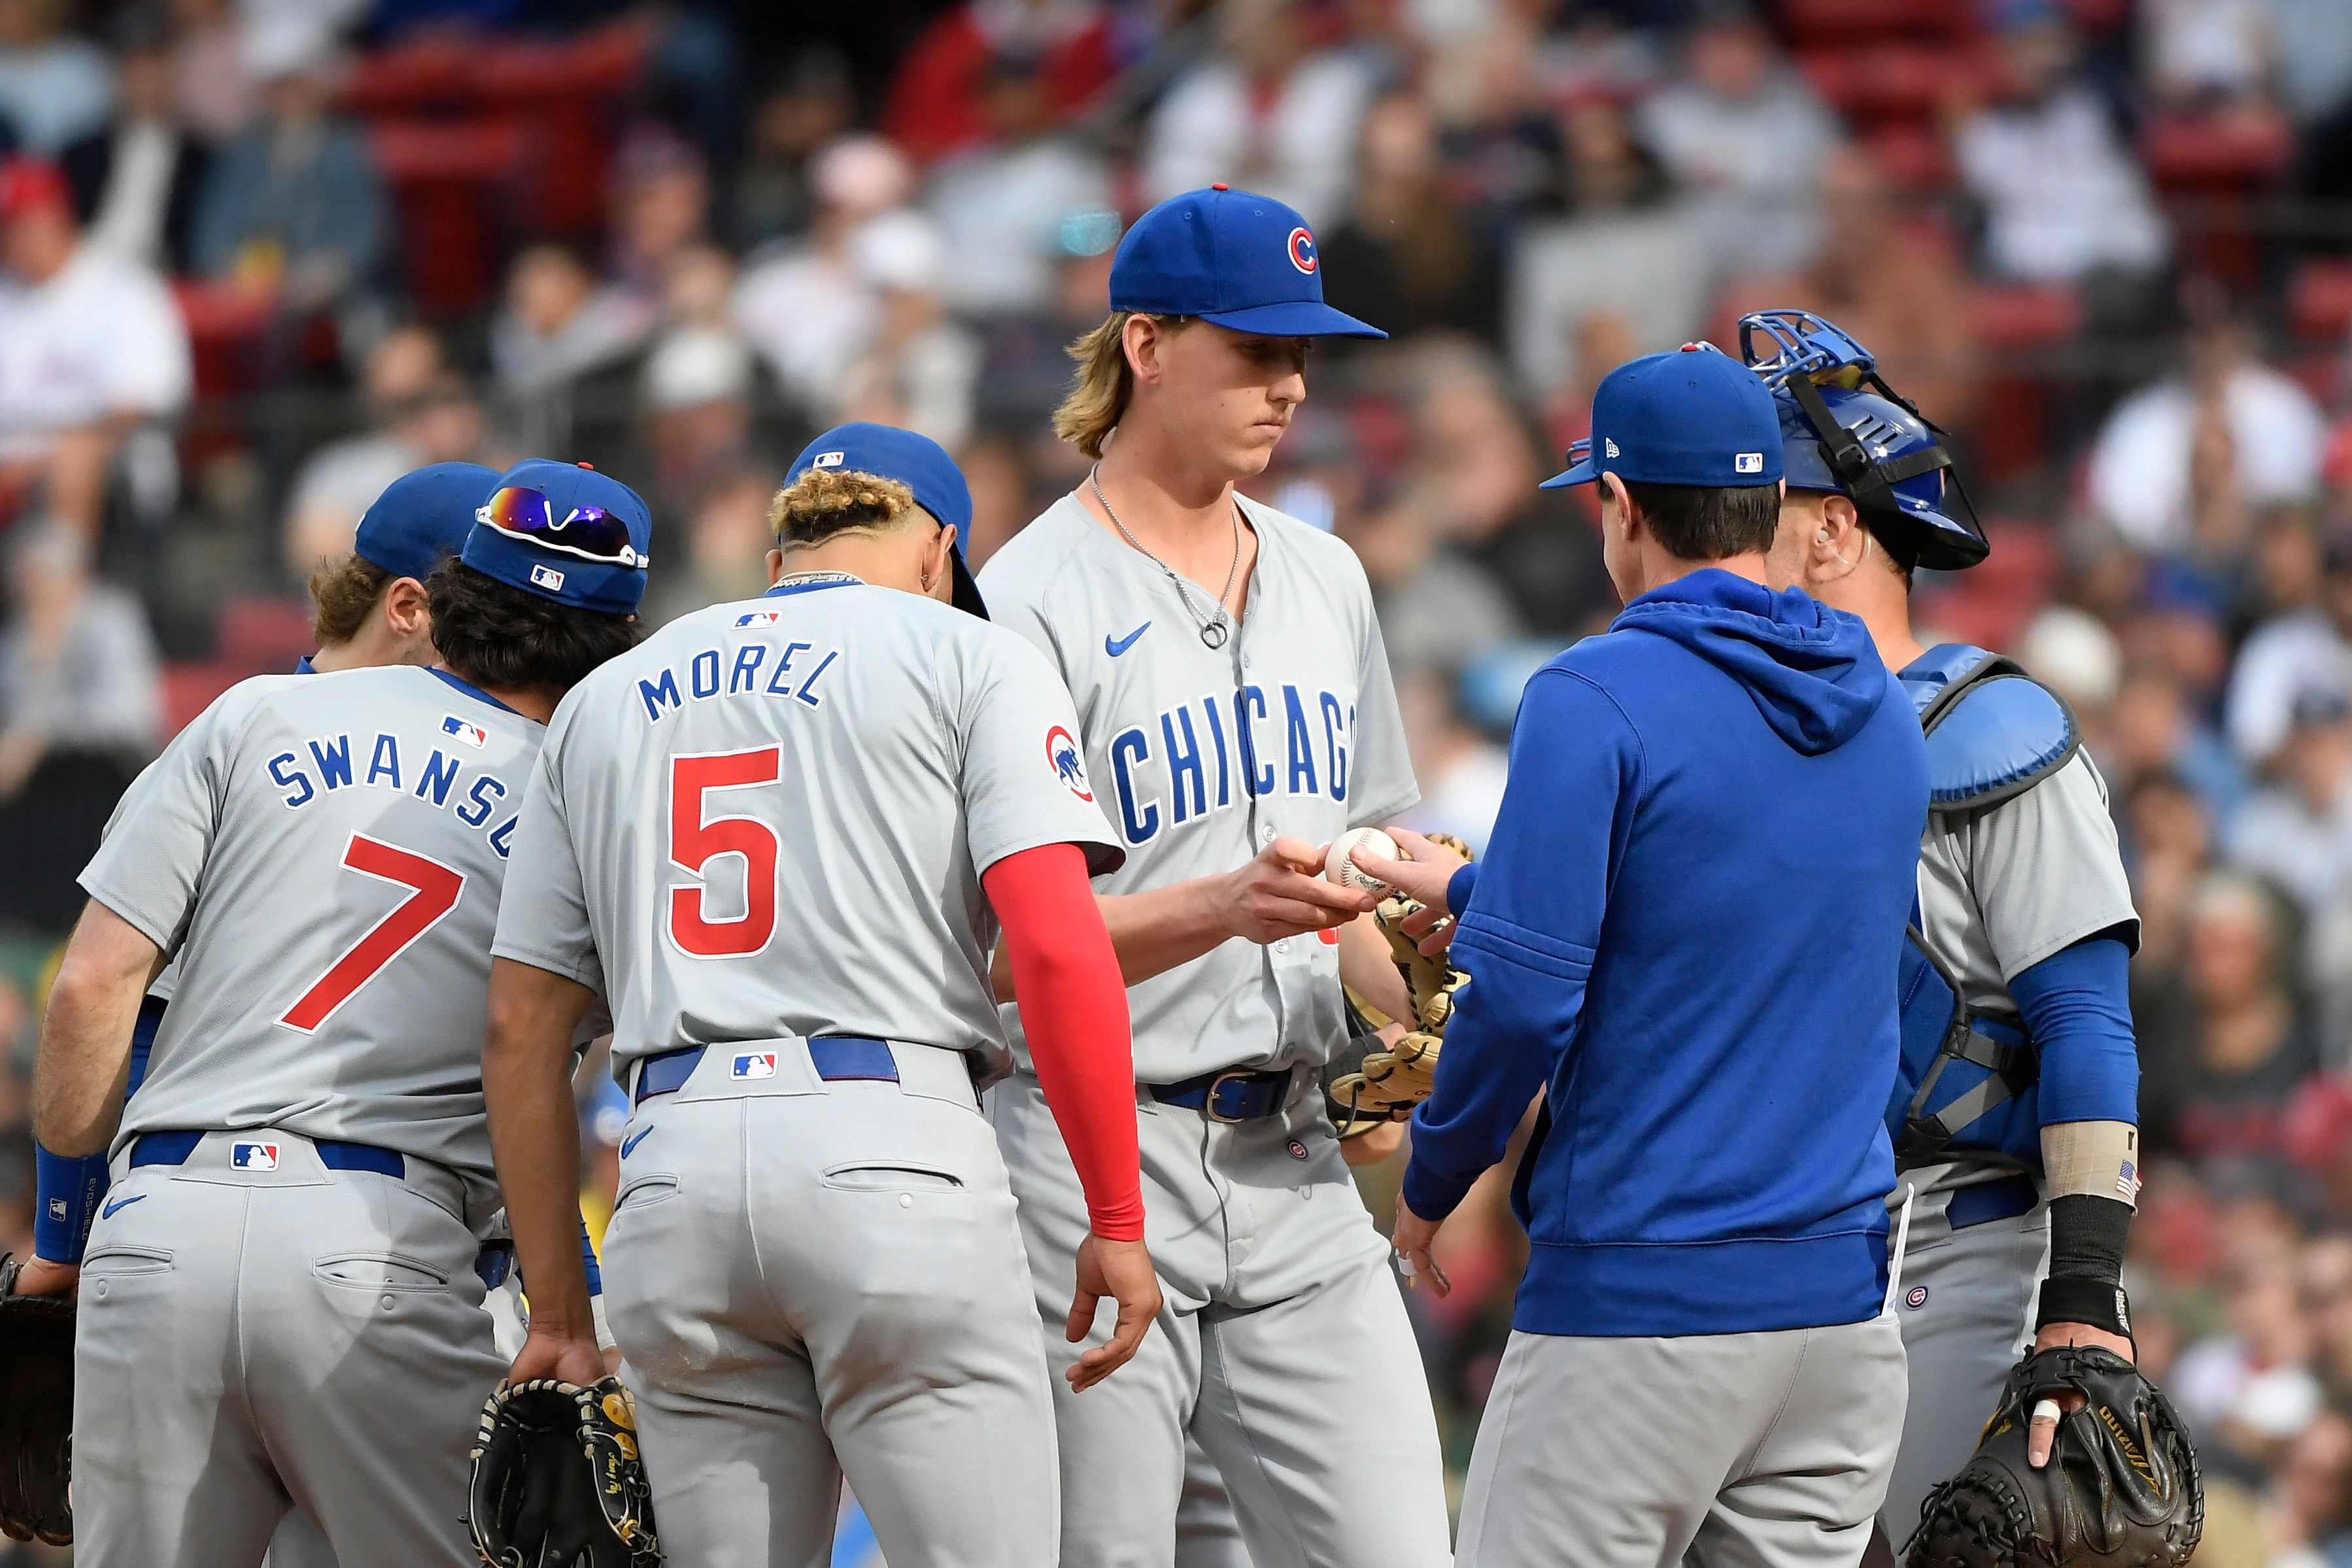 Chicago Cubs vs Boston Red Sox (Image via USA Today)